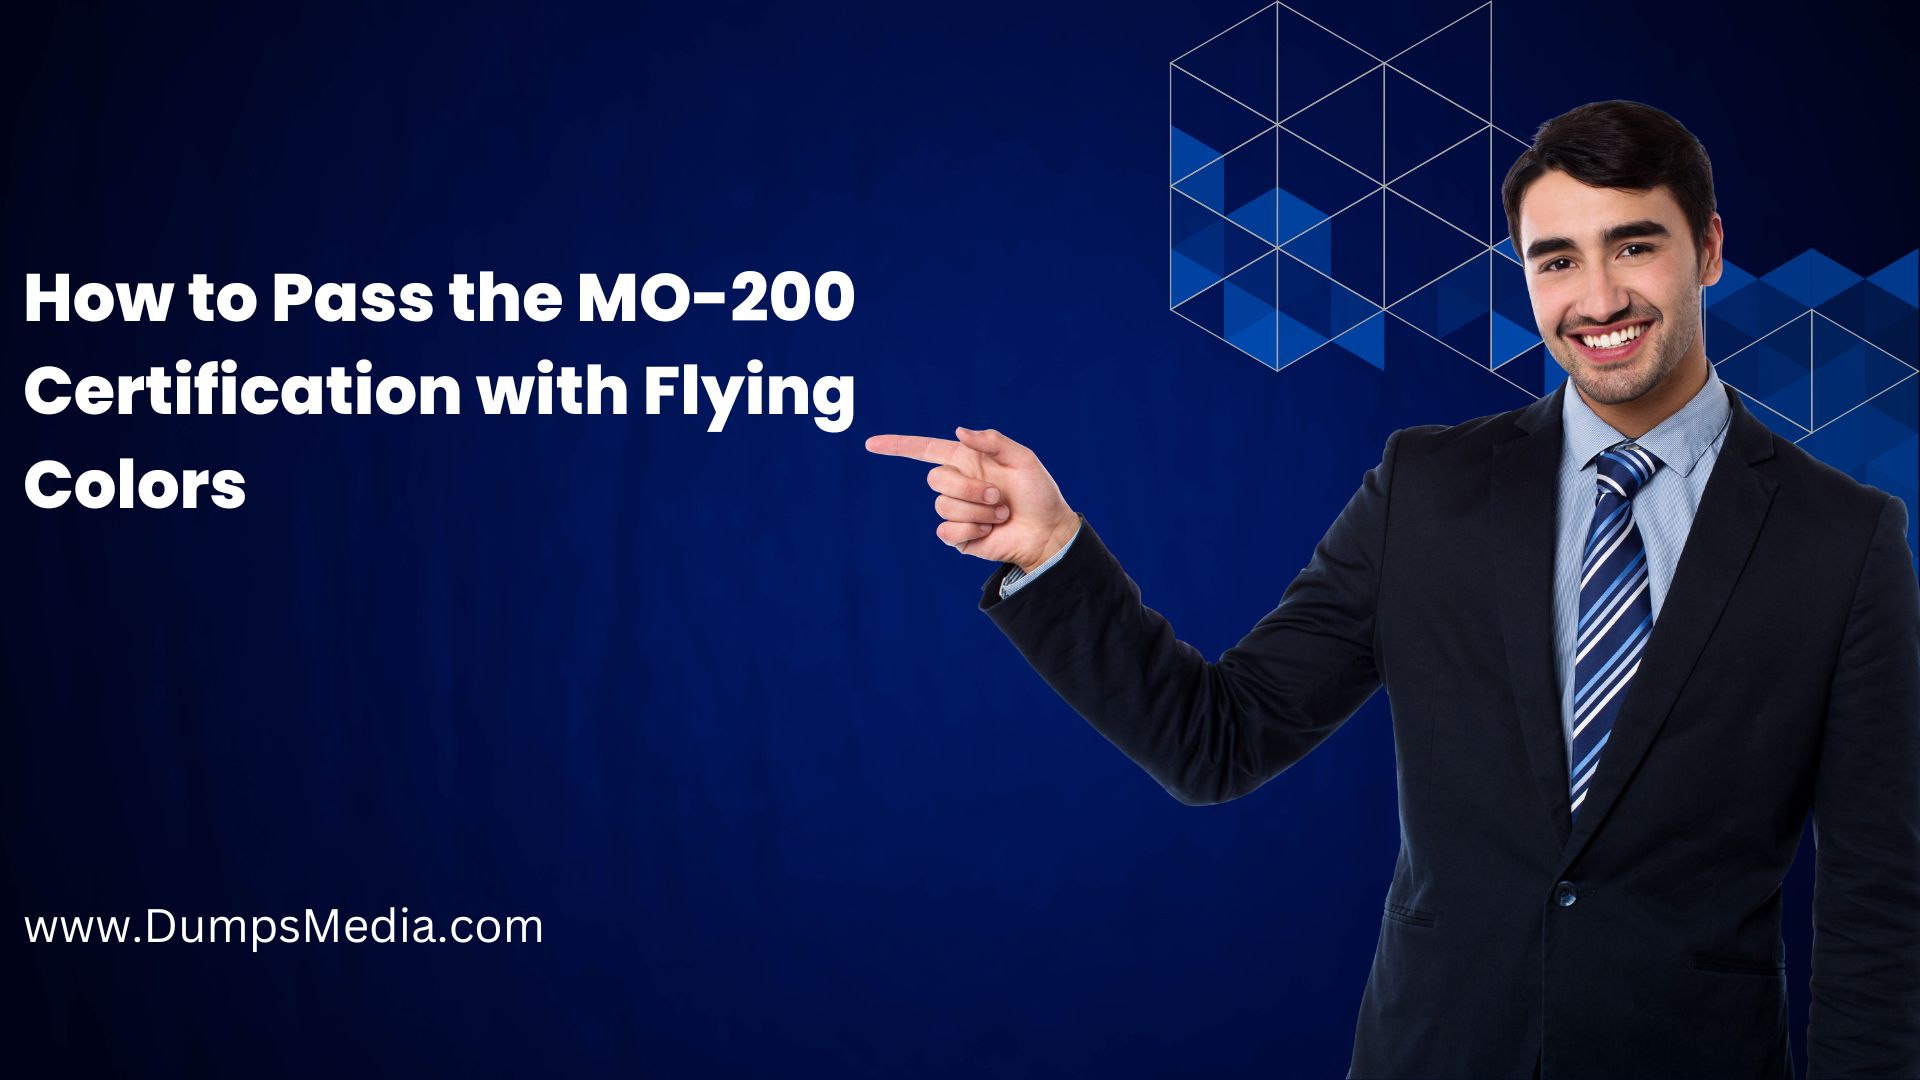 MO-200 Certification